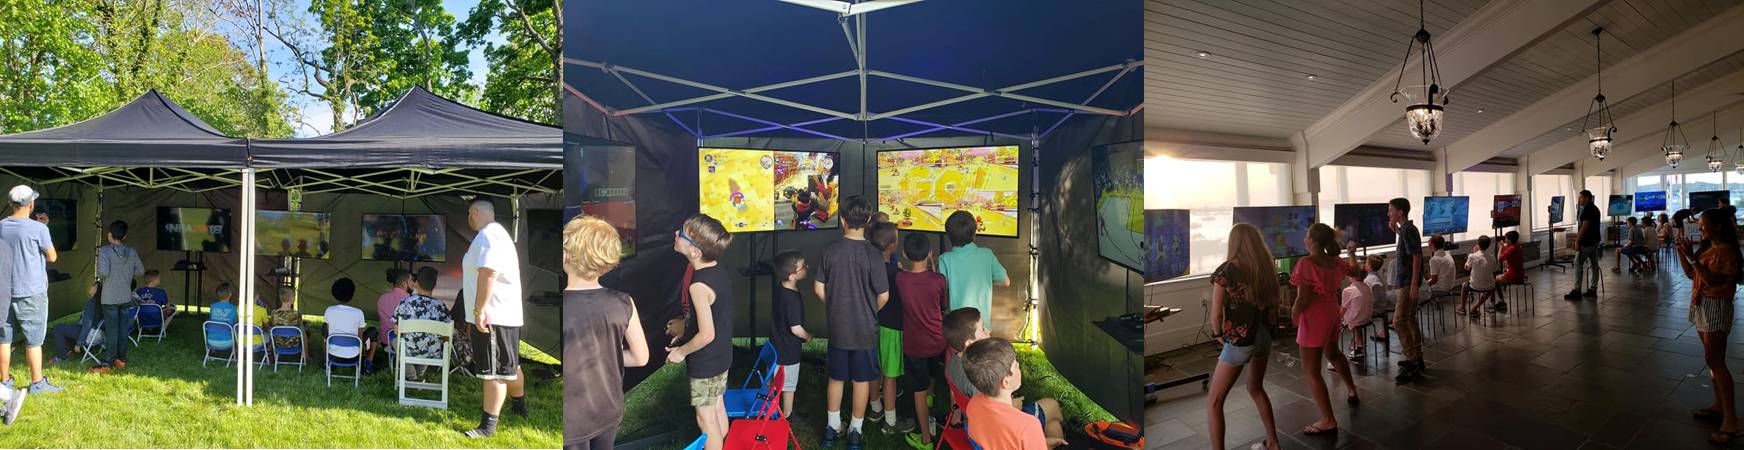 Private video game room for school functions and church groups in Long Island